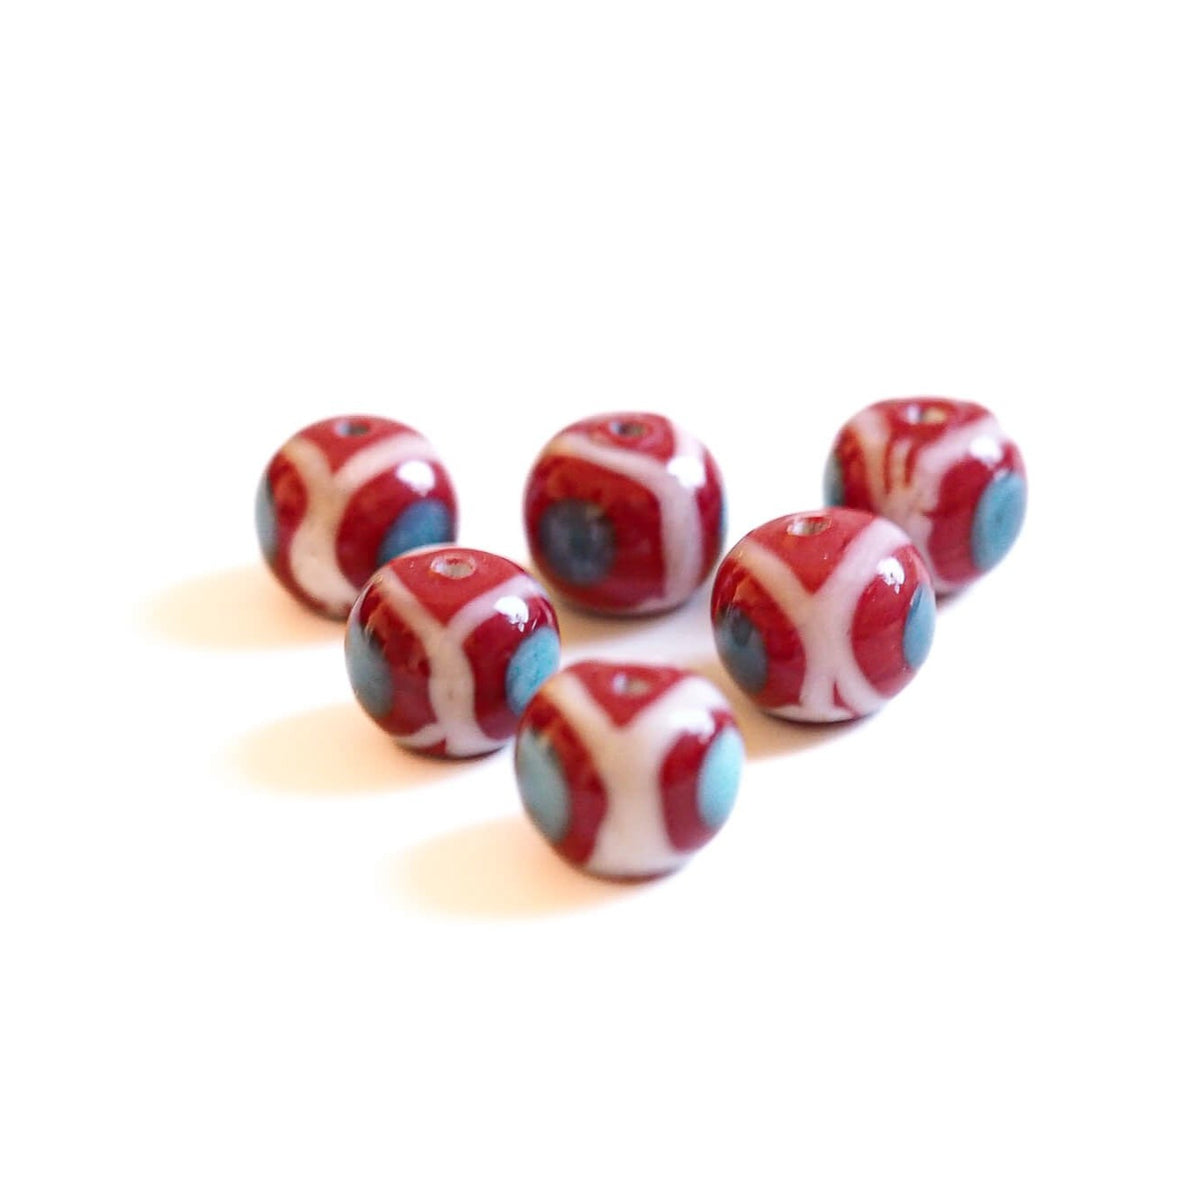 Red glass bead with decoration, glossy